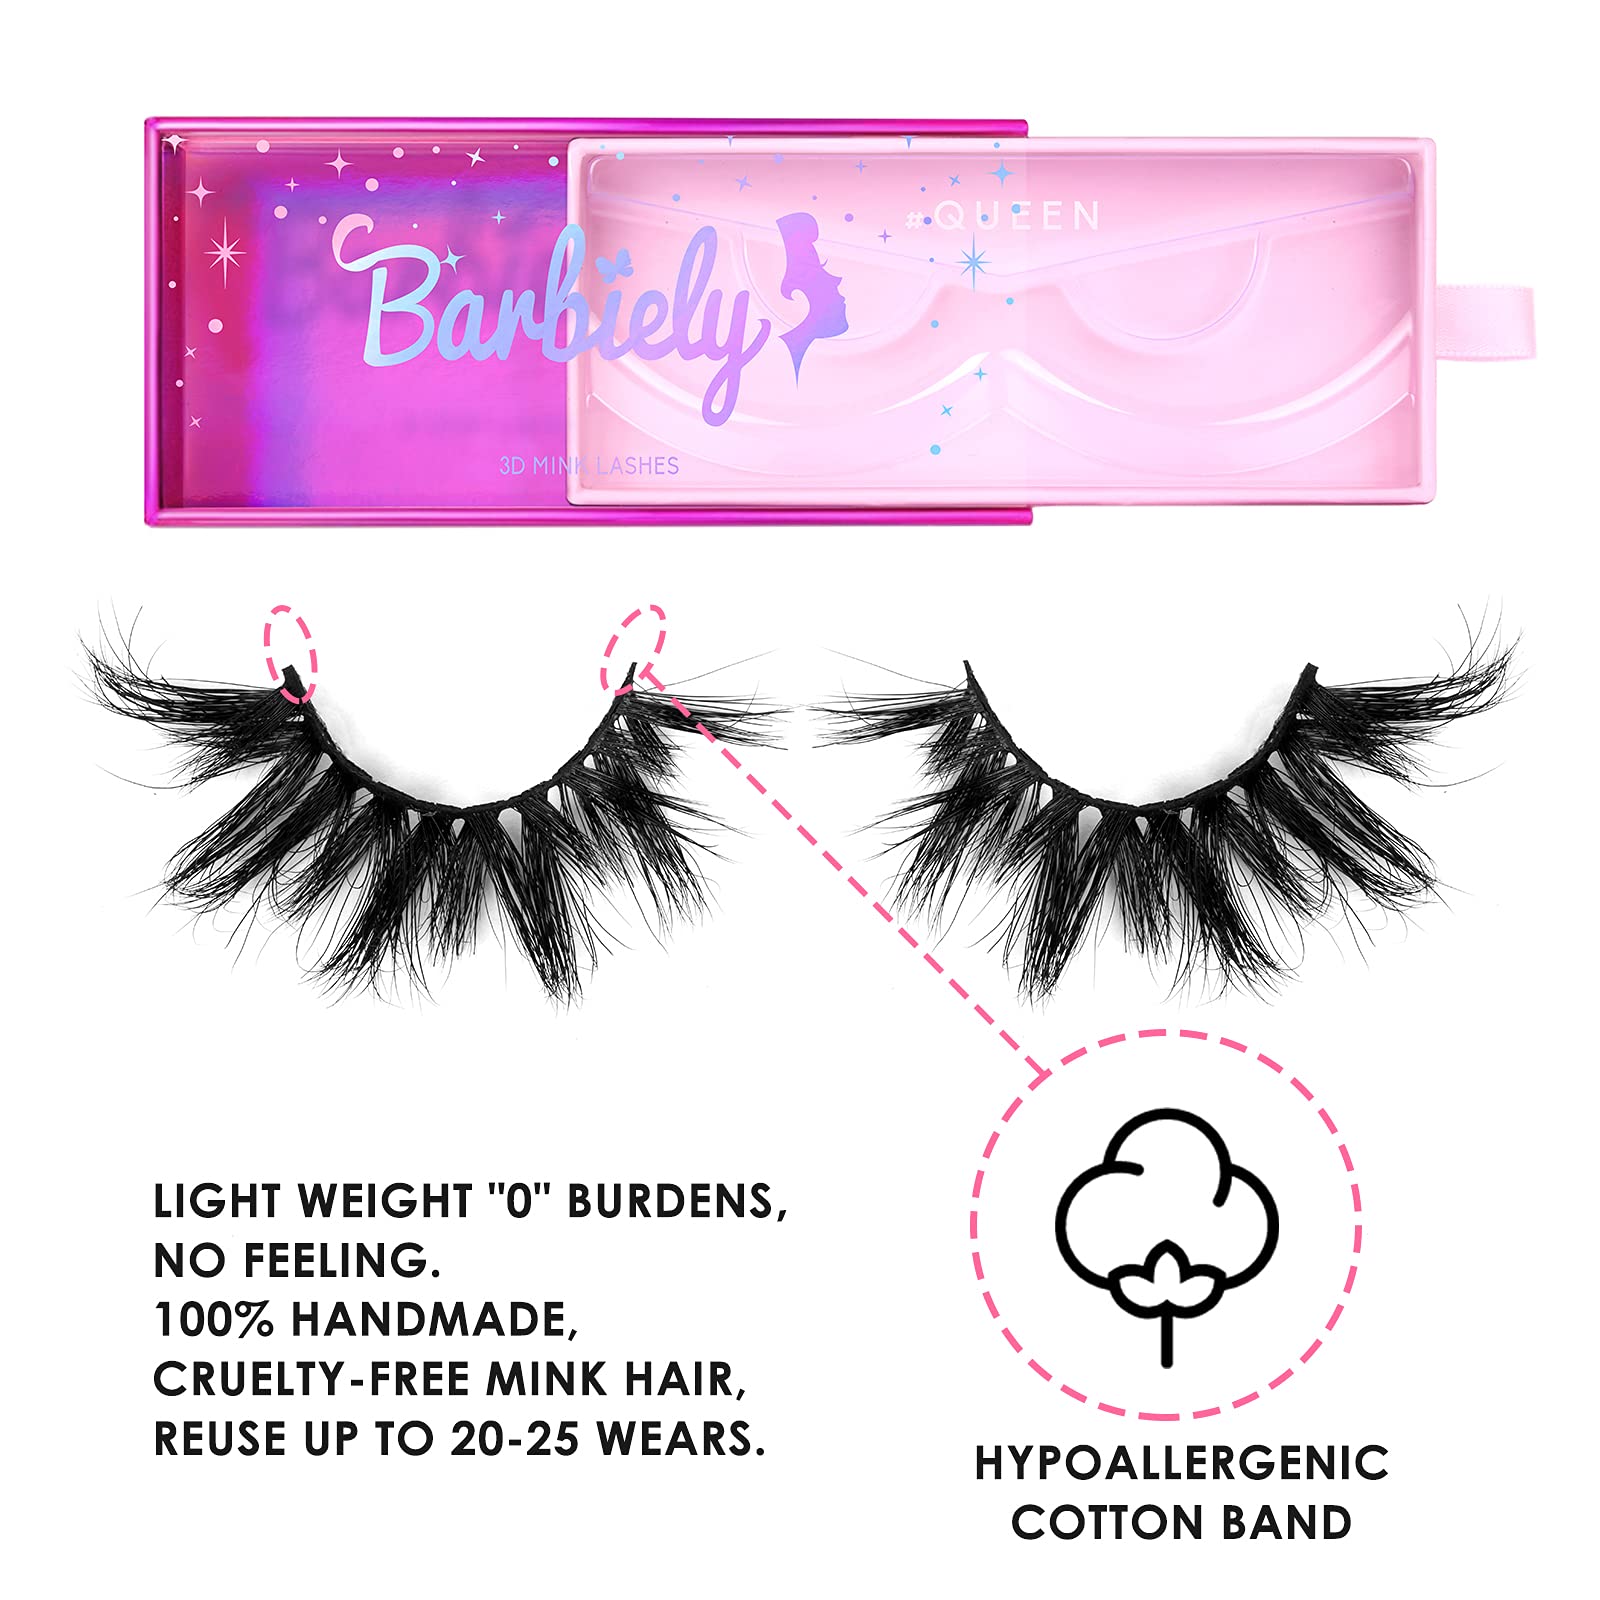 Barbiely 20mm Mink Lashes, 3D Real Mink Lashes, 3 Pairs Fluffy Dramatic False Eyelashes, 100% HandMade Mink Lshes, 6D Wispy Long Thick Full Volume Strip Eye Lashes, Cruelty Free(Party Time)